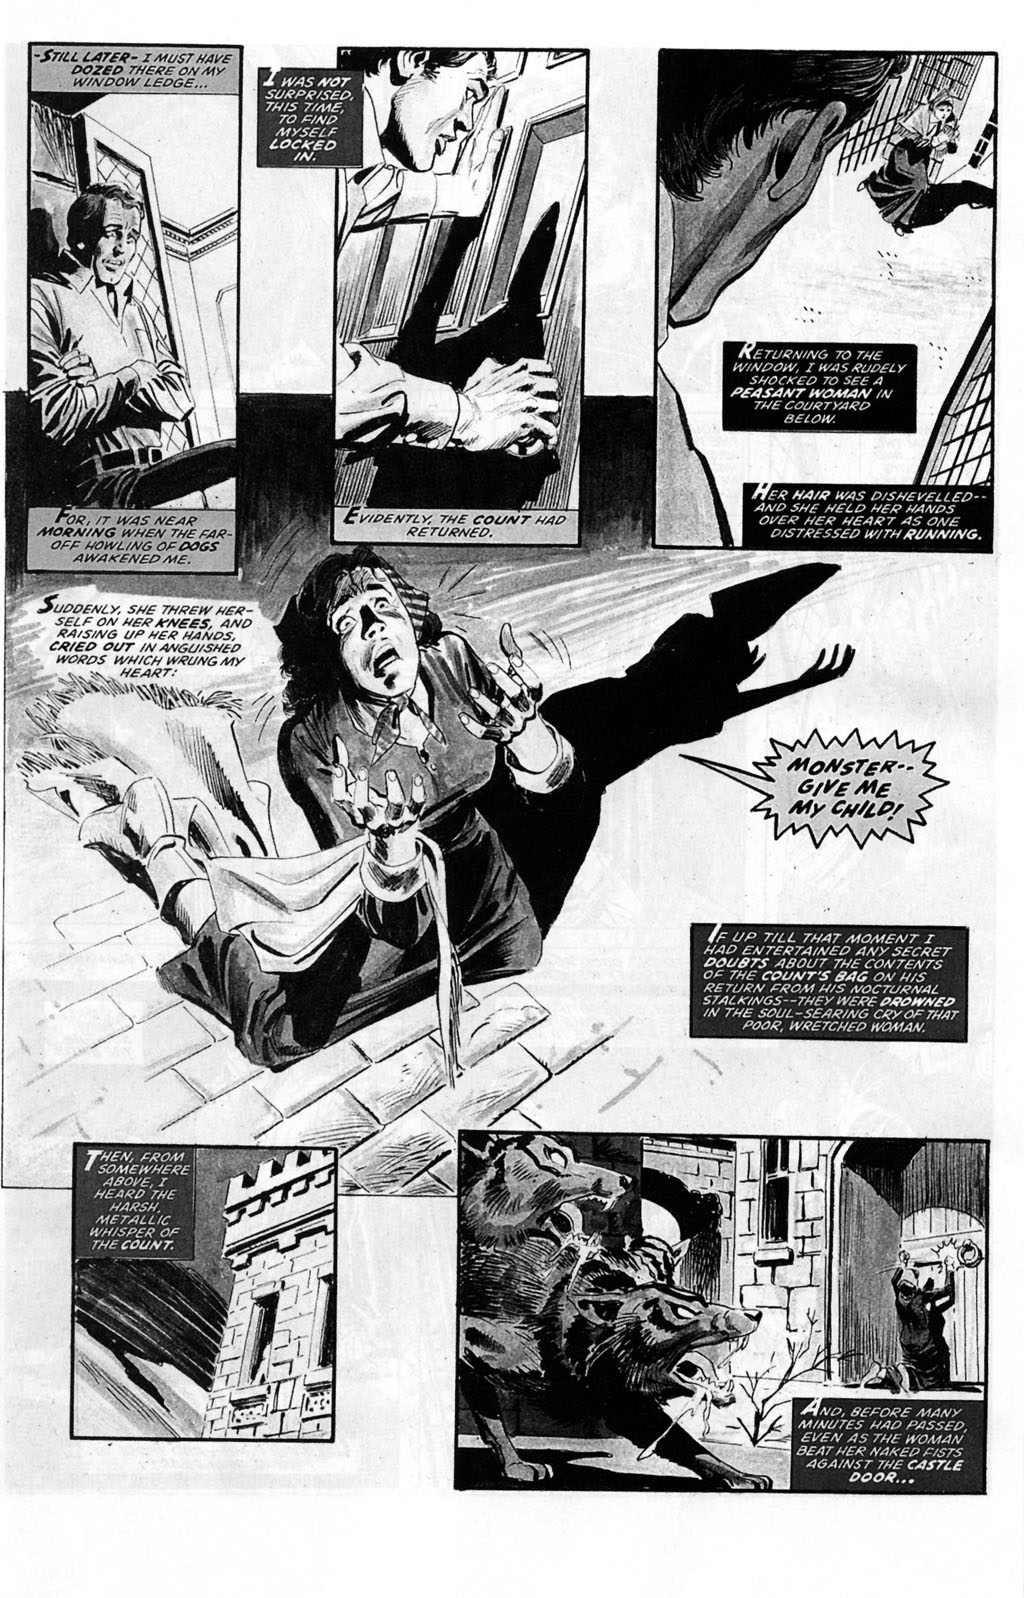 Read online Stoker's Dracula comic -  Issue #1 - 39